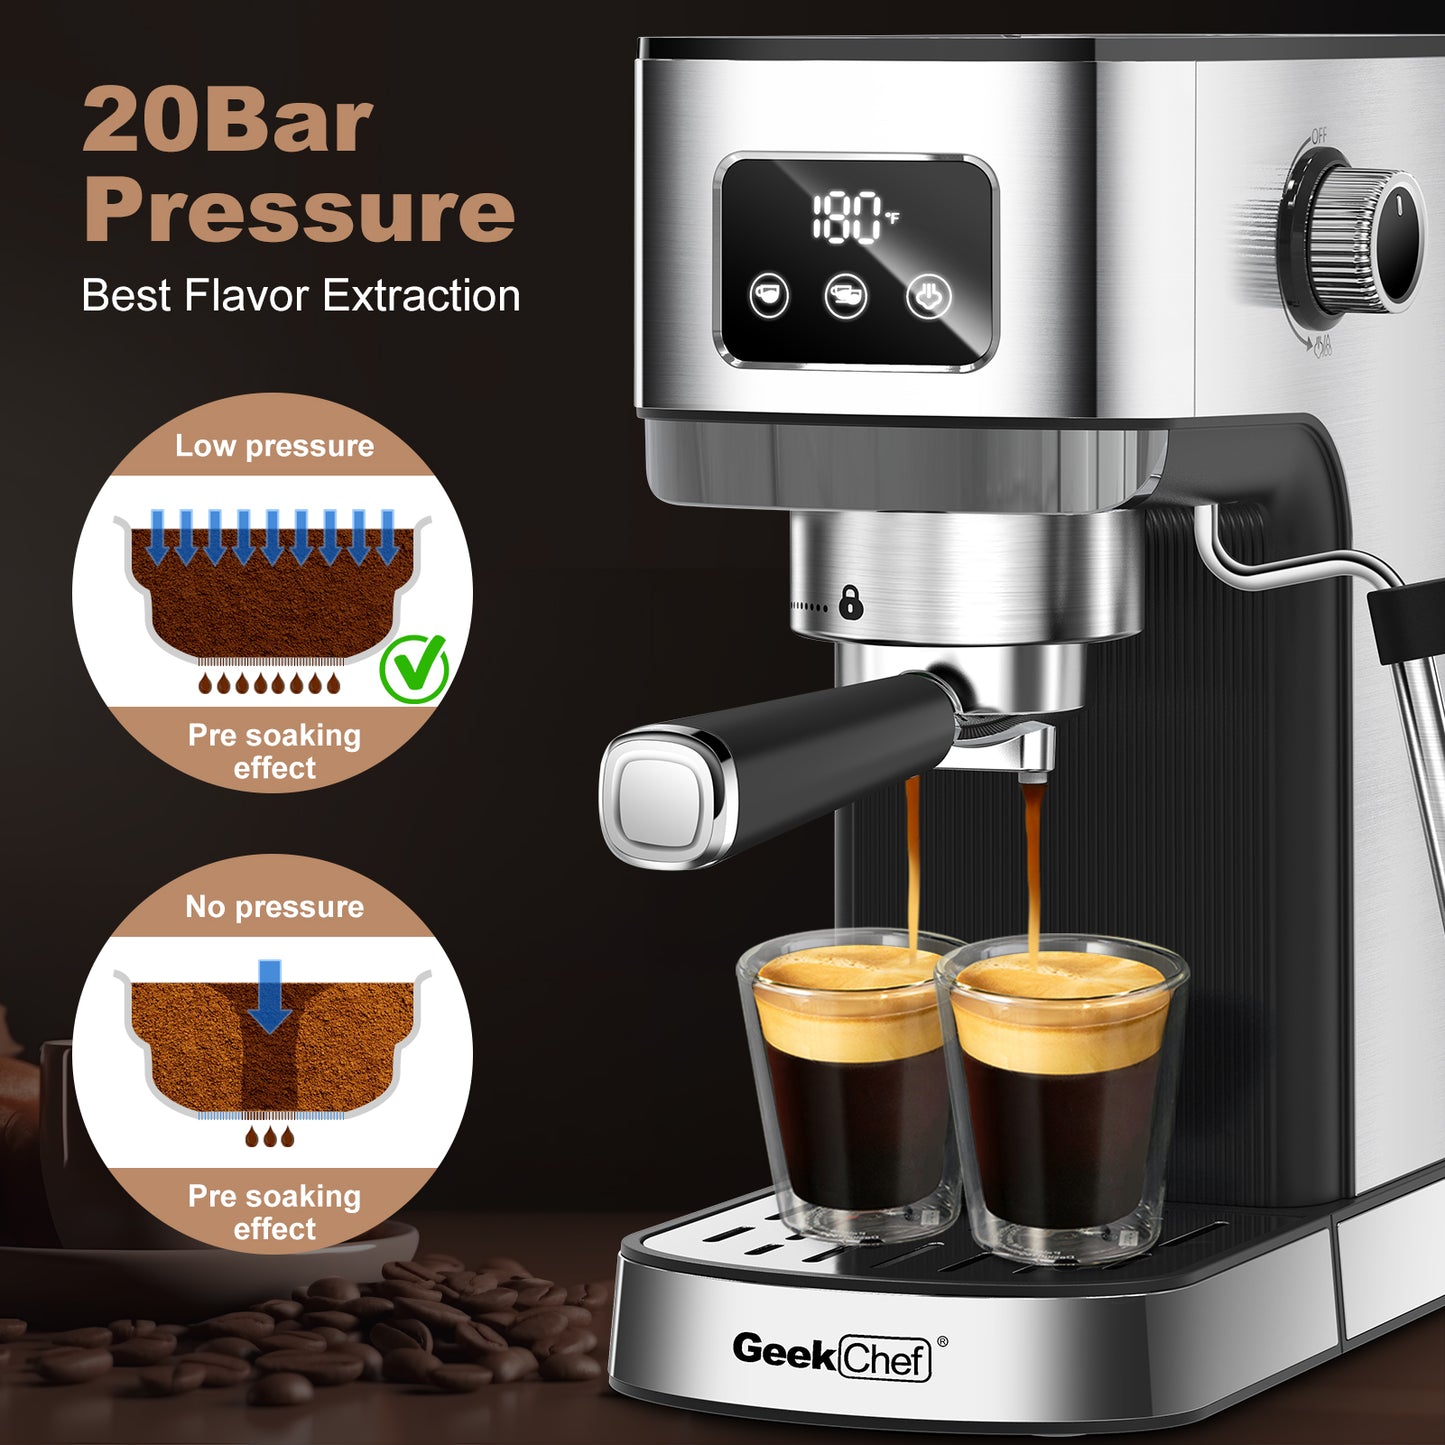 Geek Chef Espresso Machine,20 bar espresso machine with milk frother for latte,cappuccino, household espresso maker,1.1L Water Tank,Stainless Steel